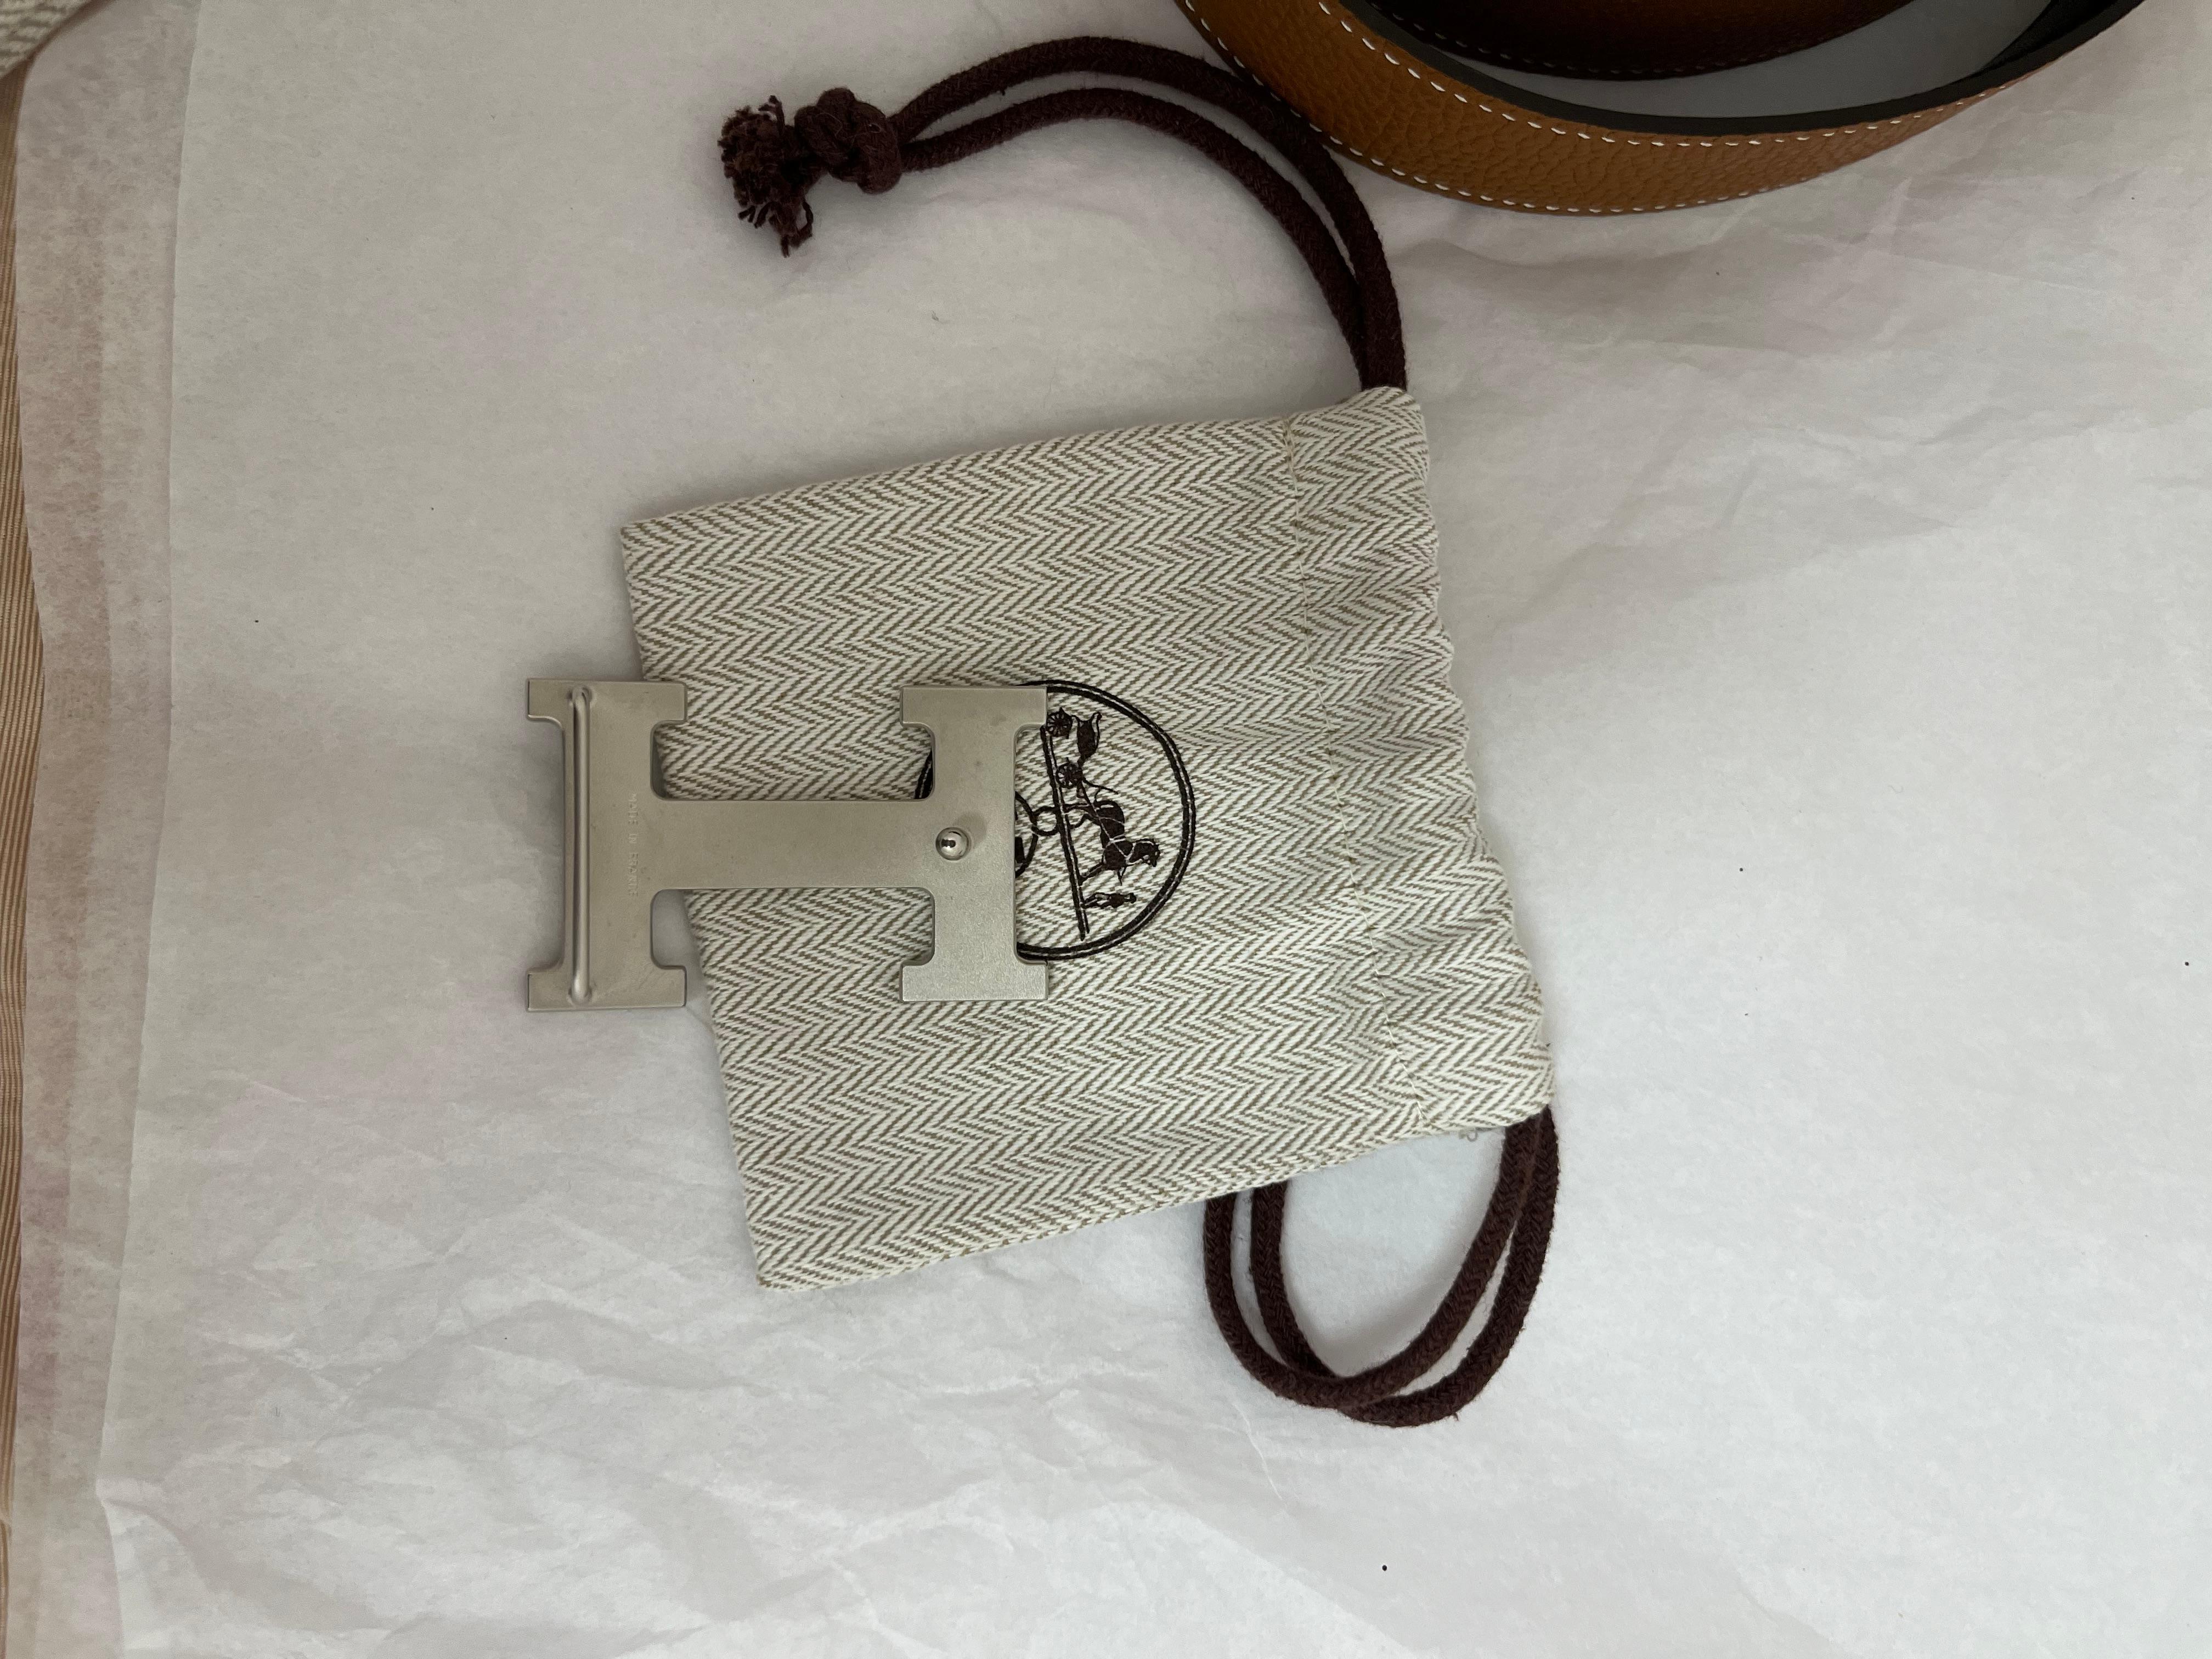 Women's Hermes H Reversible Belt and the H buckle